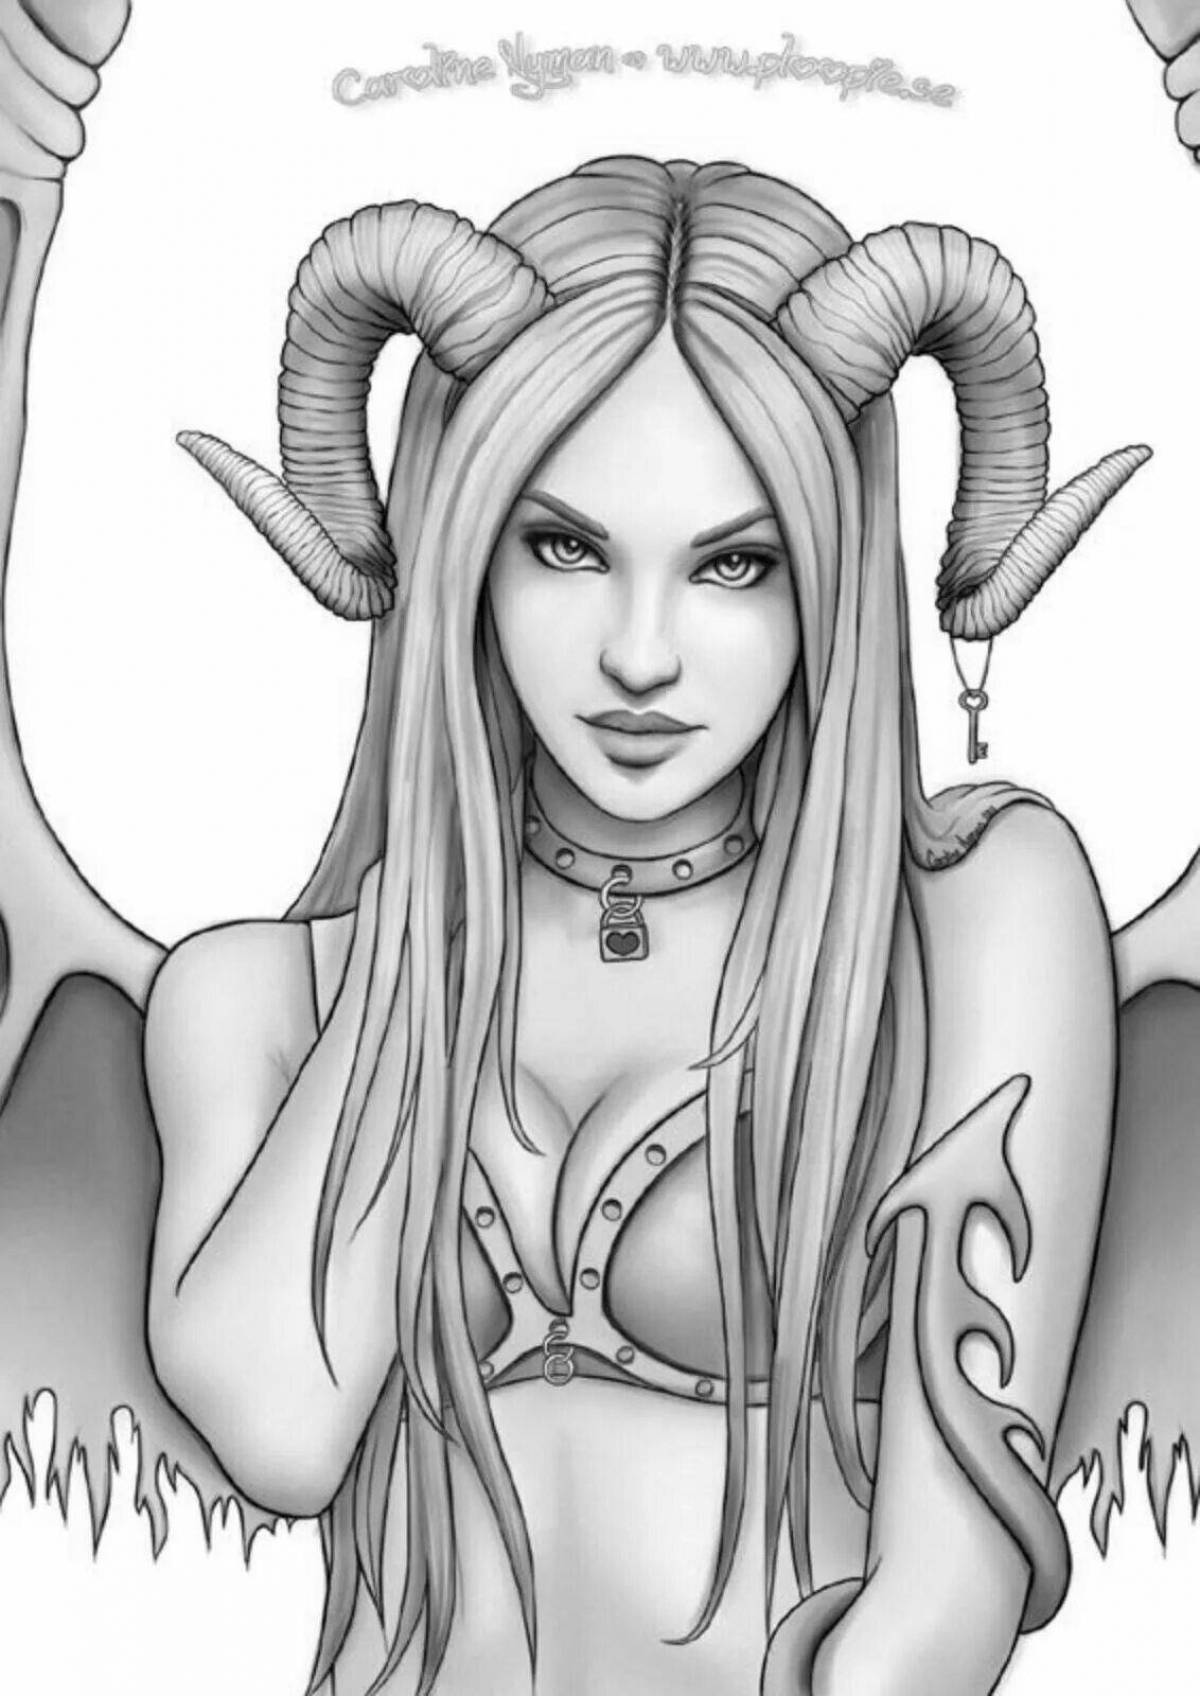 Charming coloring of a girl with horns